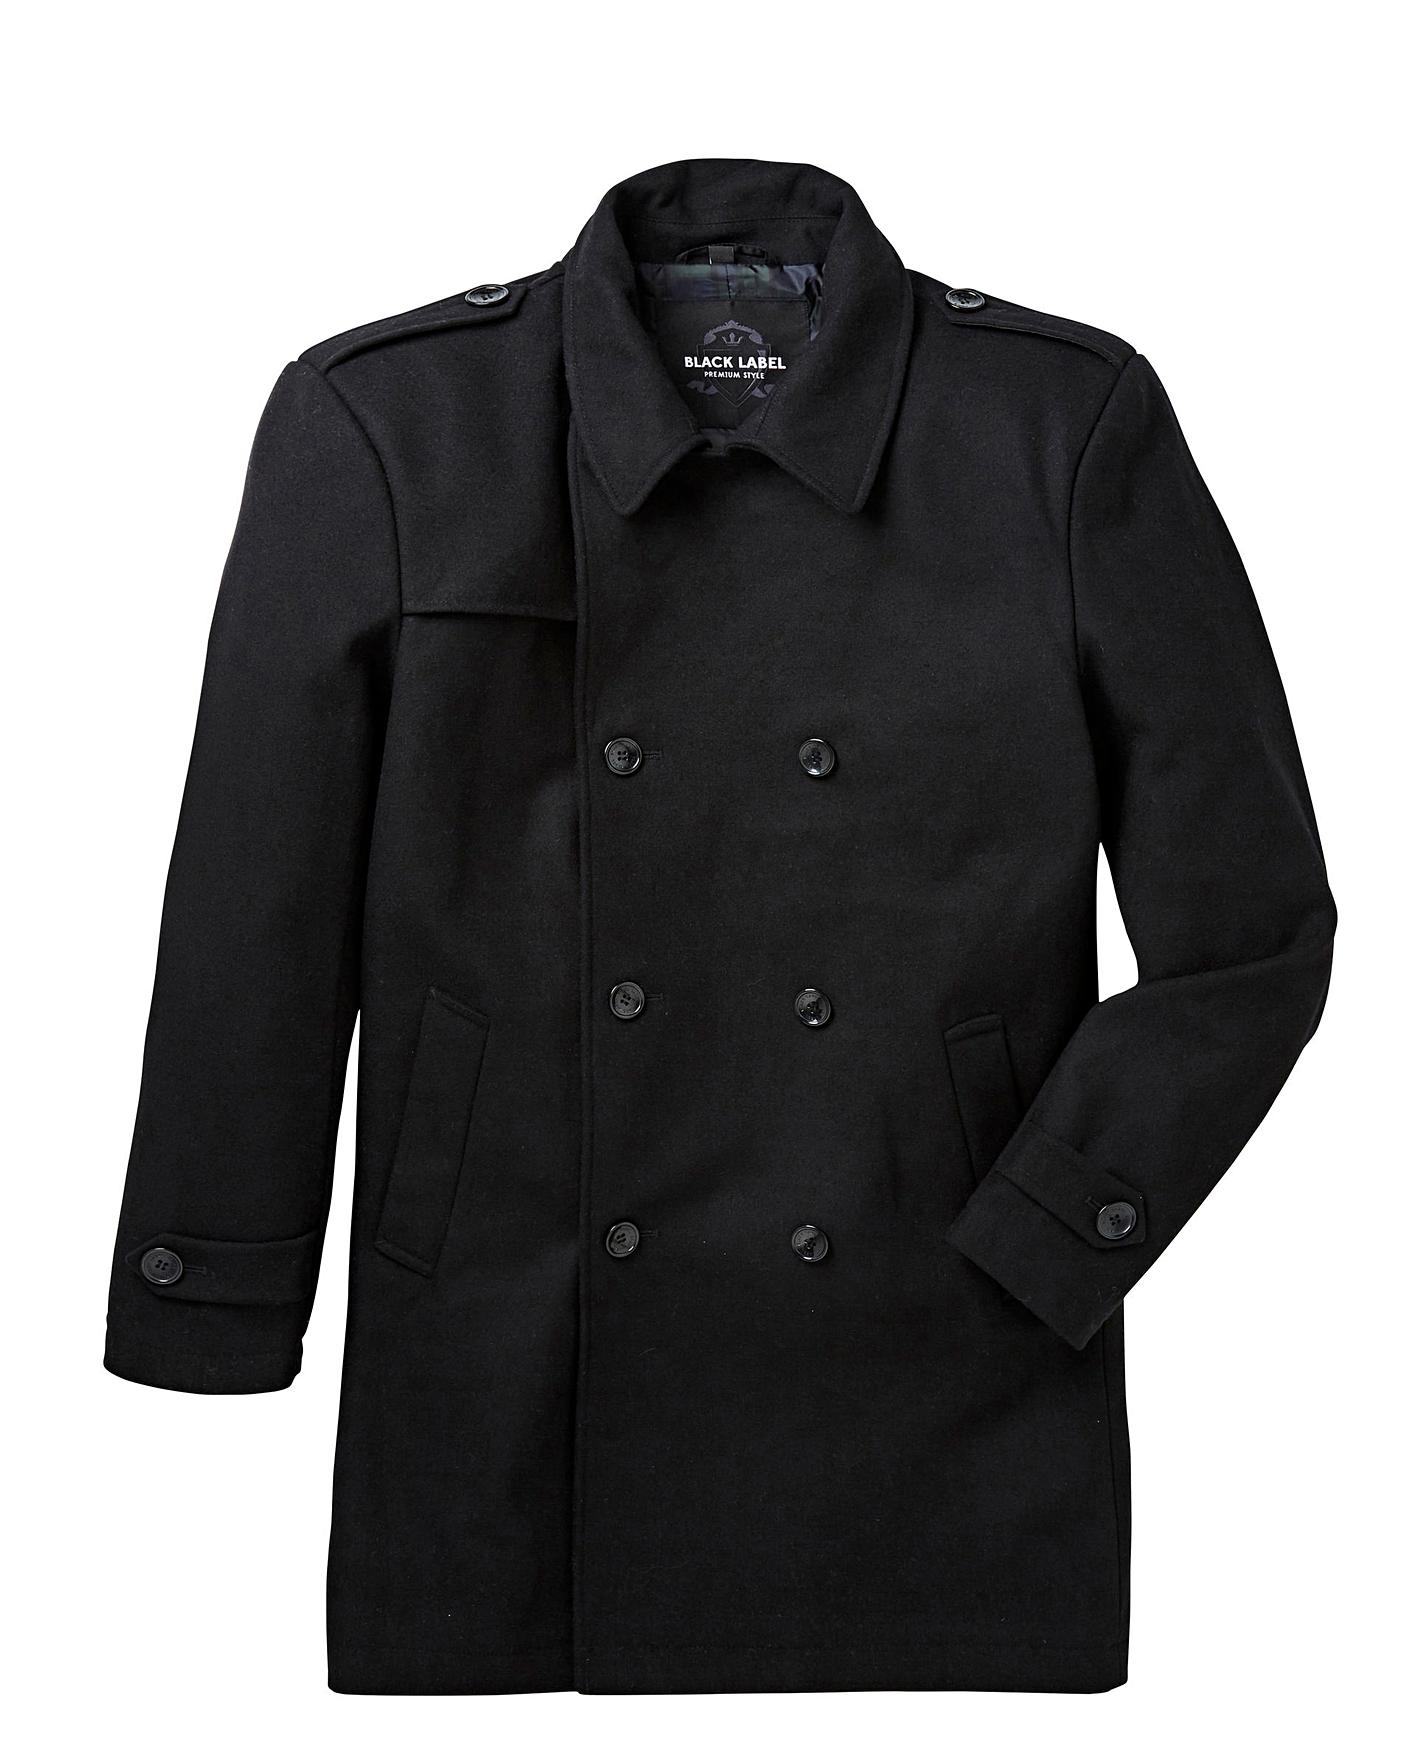 Jacamo Black Label Wool Trench Coat R | Crazy Clearance